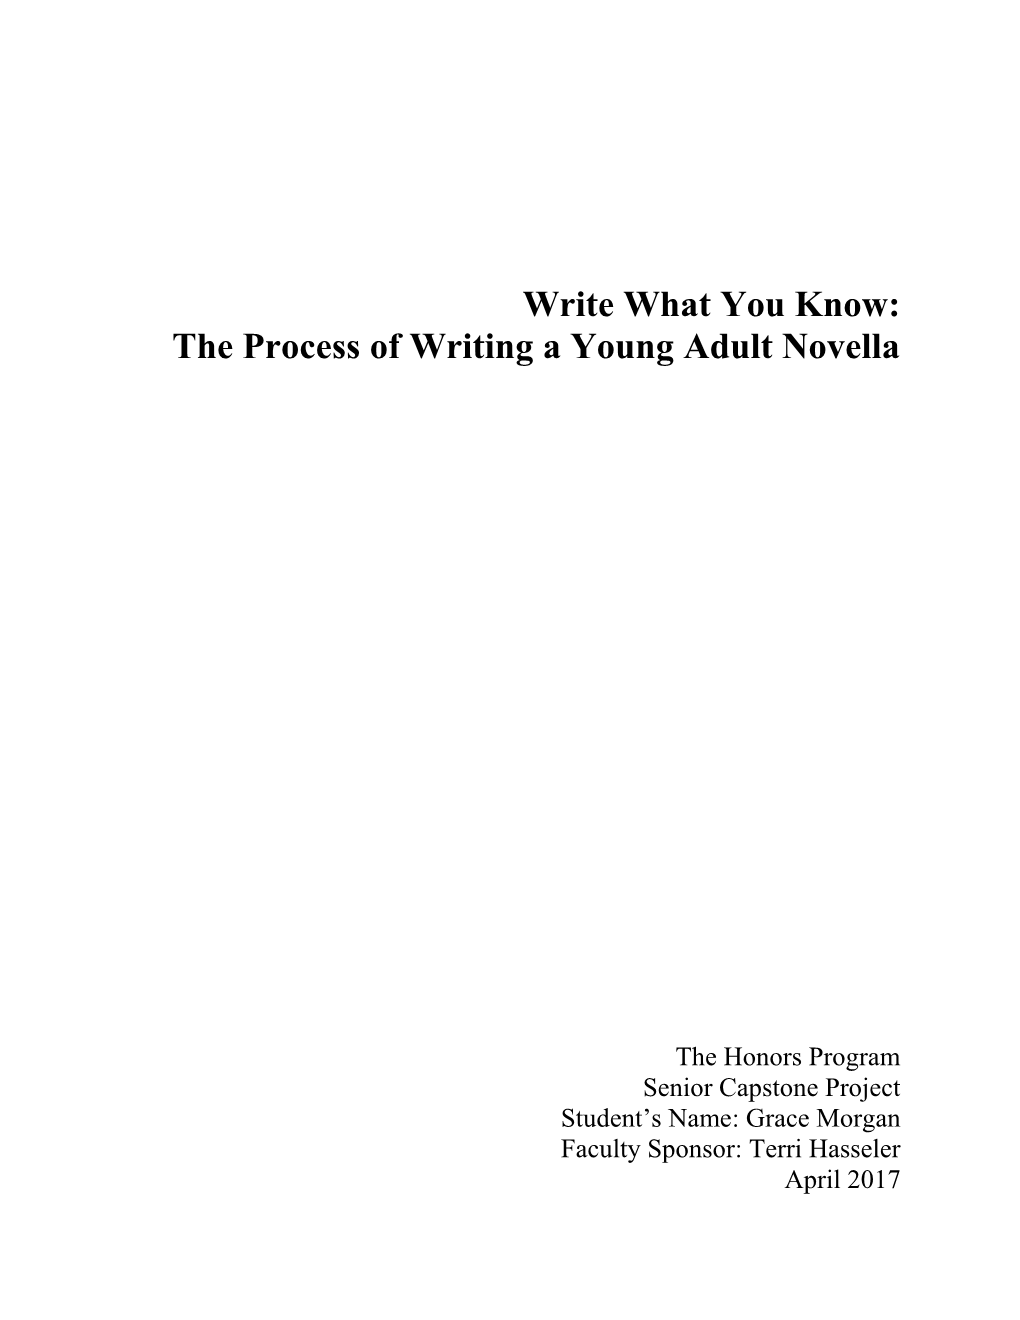 Write What You Know: the Process of Writing a Young Adult Novella